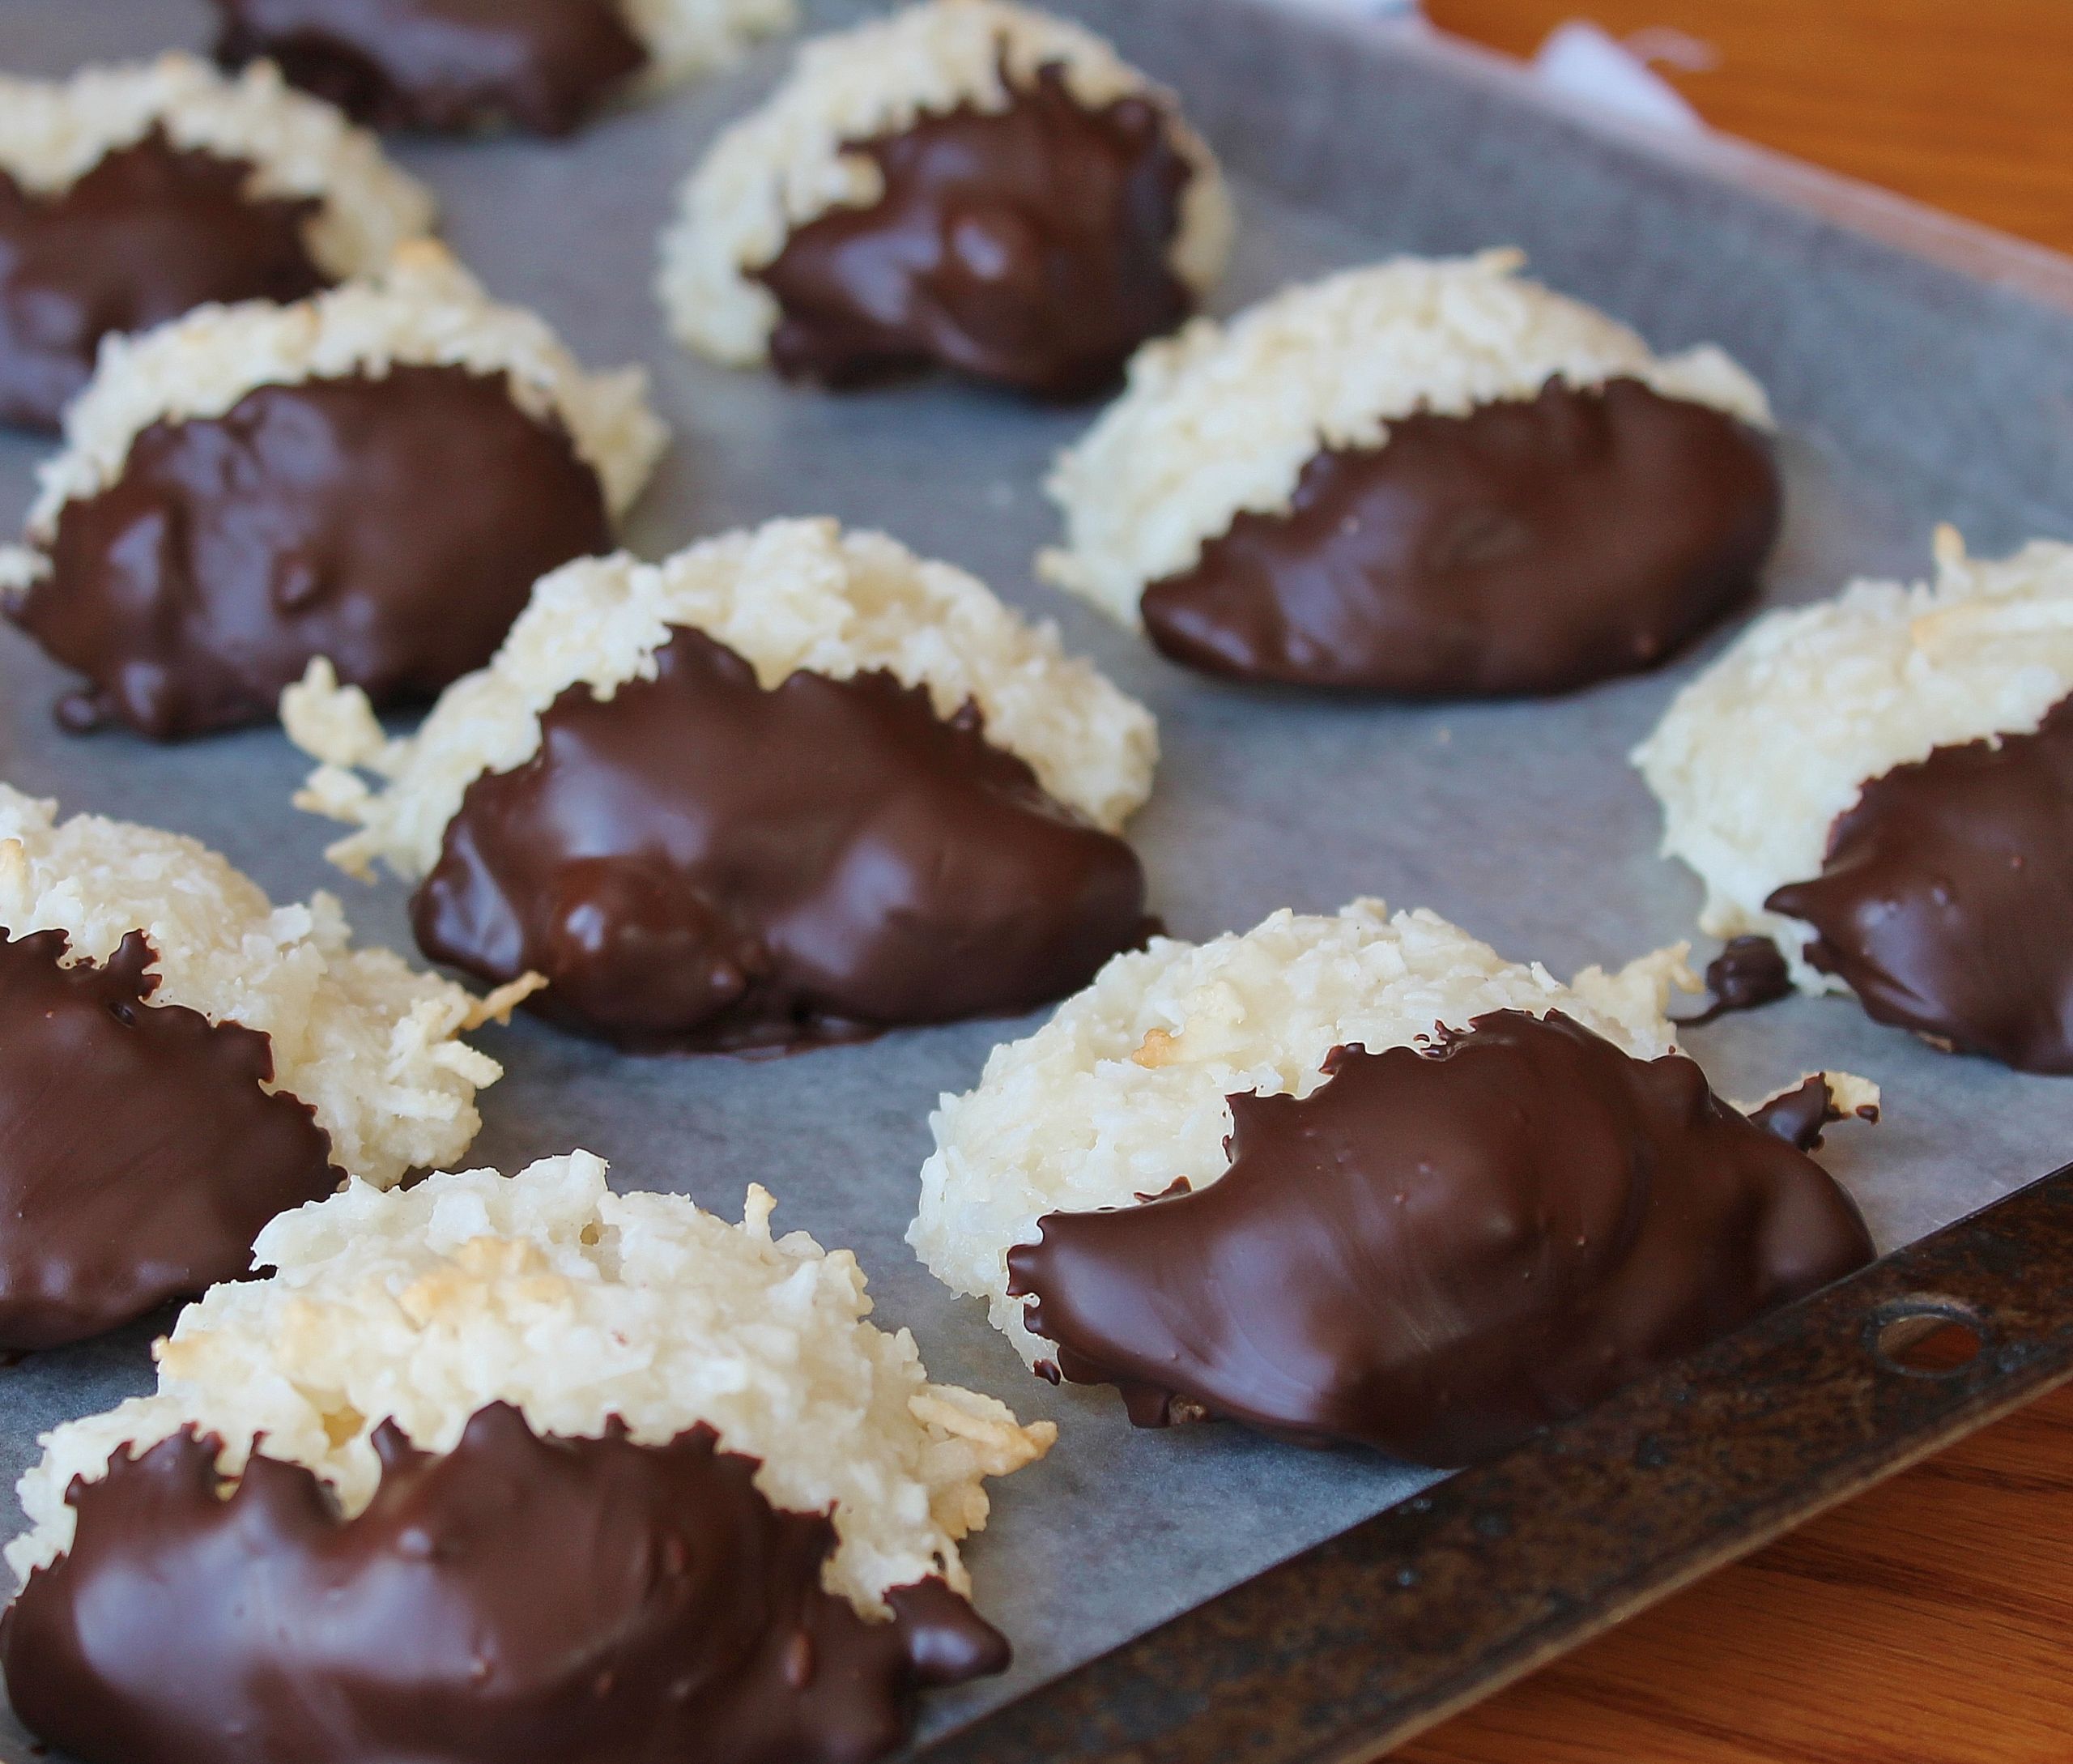 Chocolate Dipped Coconut Macaroons Recipe
 Saturday Sweets Dipped Coconut Macaroons